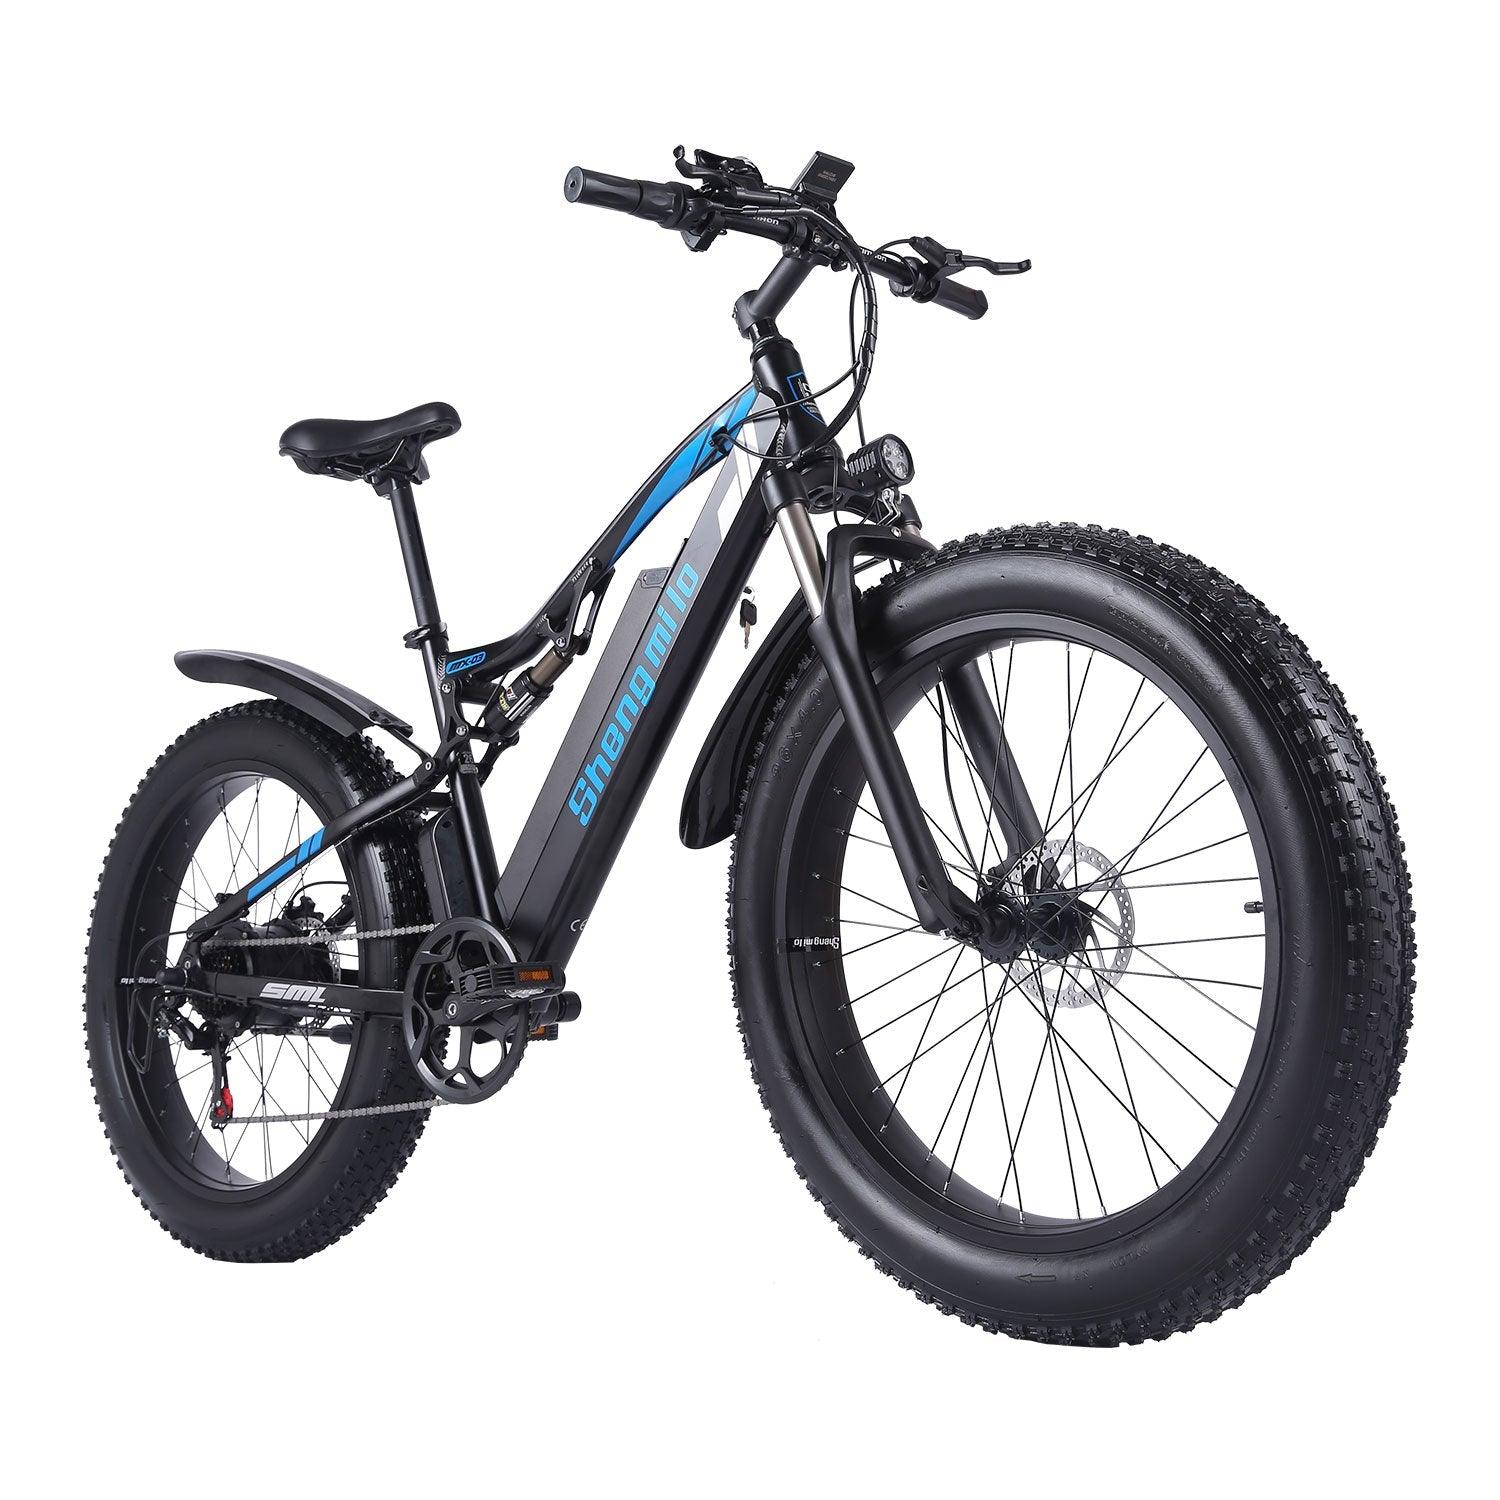 Shengmilo MX03 Electric Bike - Pogo cycles UK -cycle to work scheme available